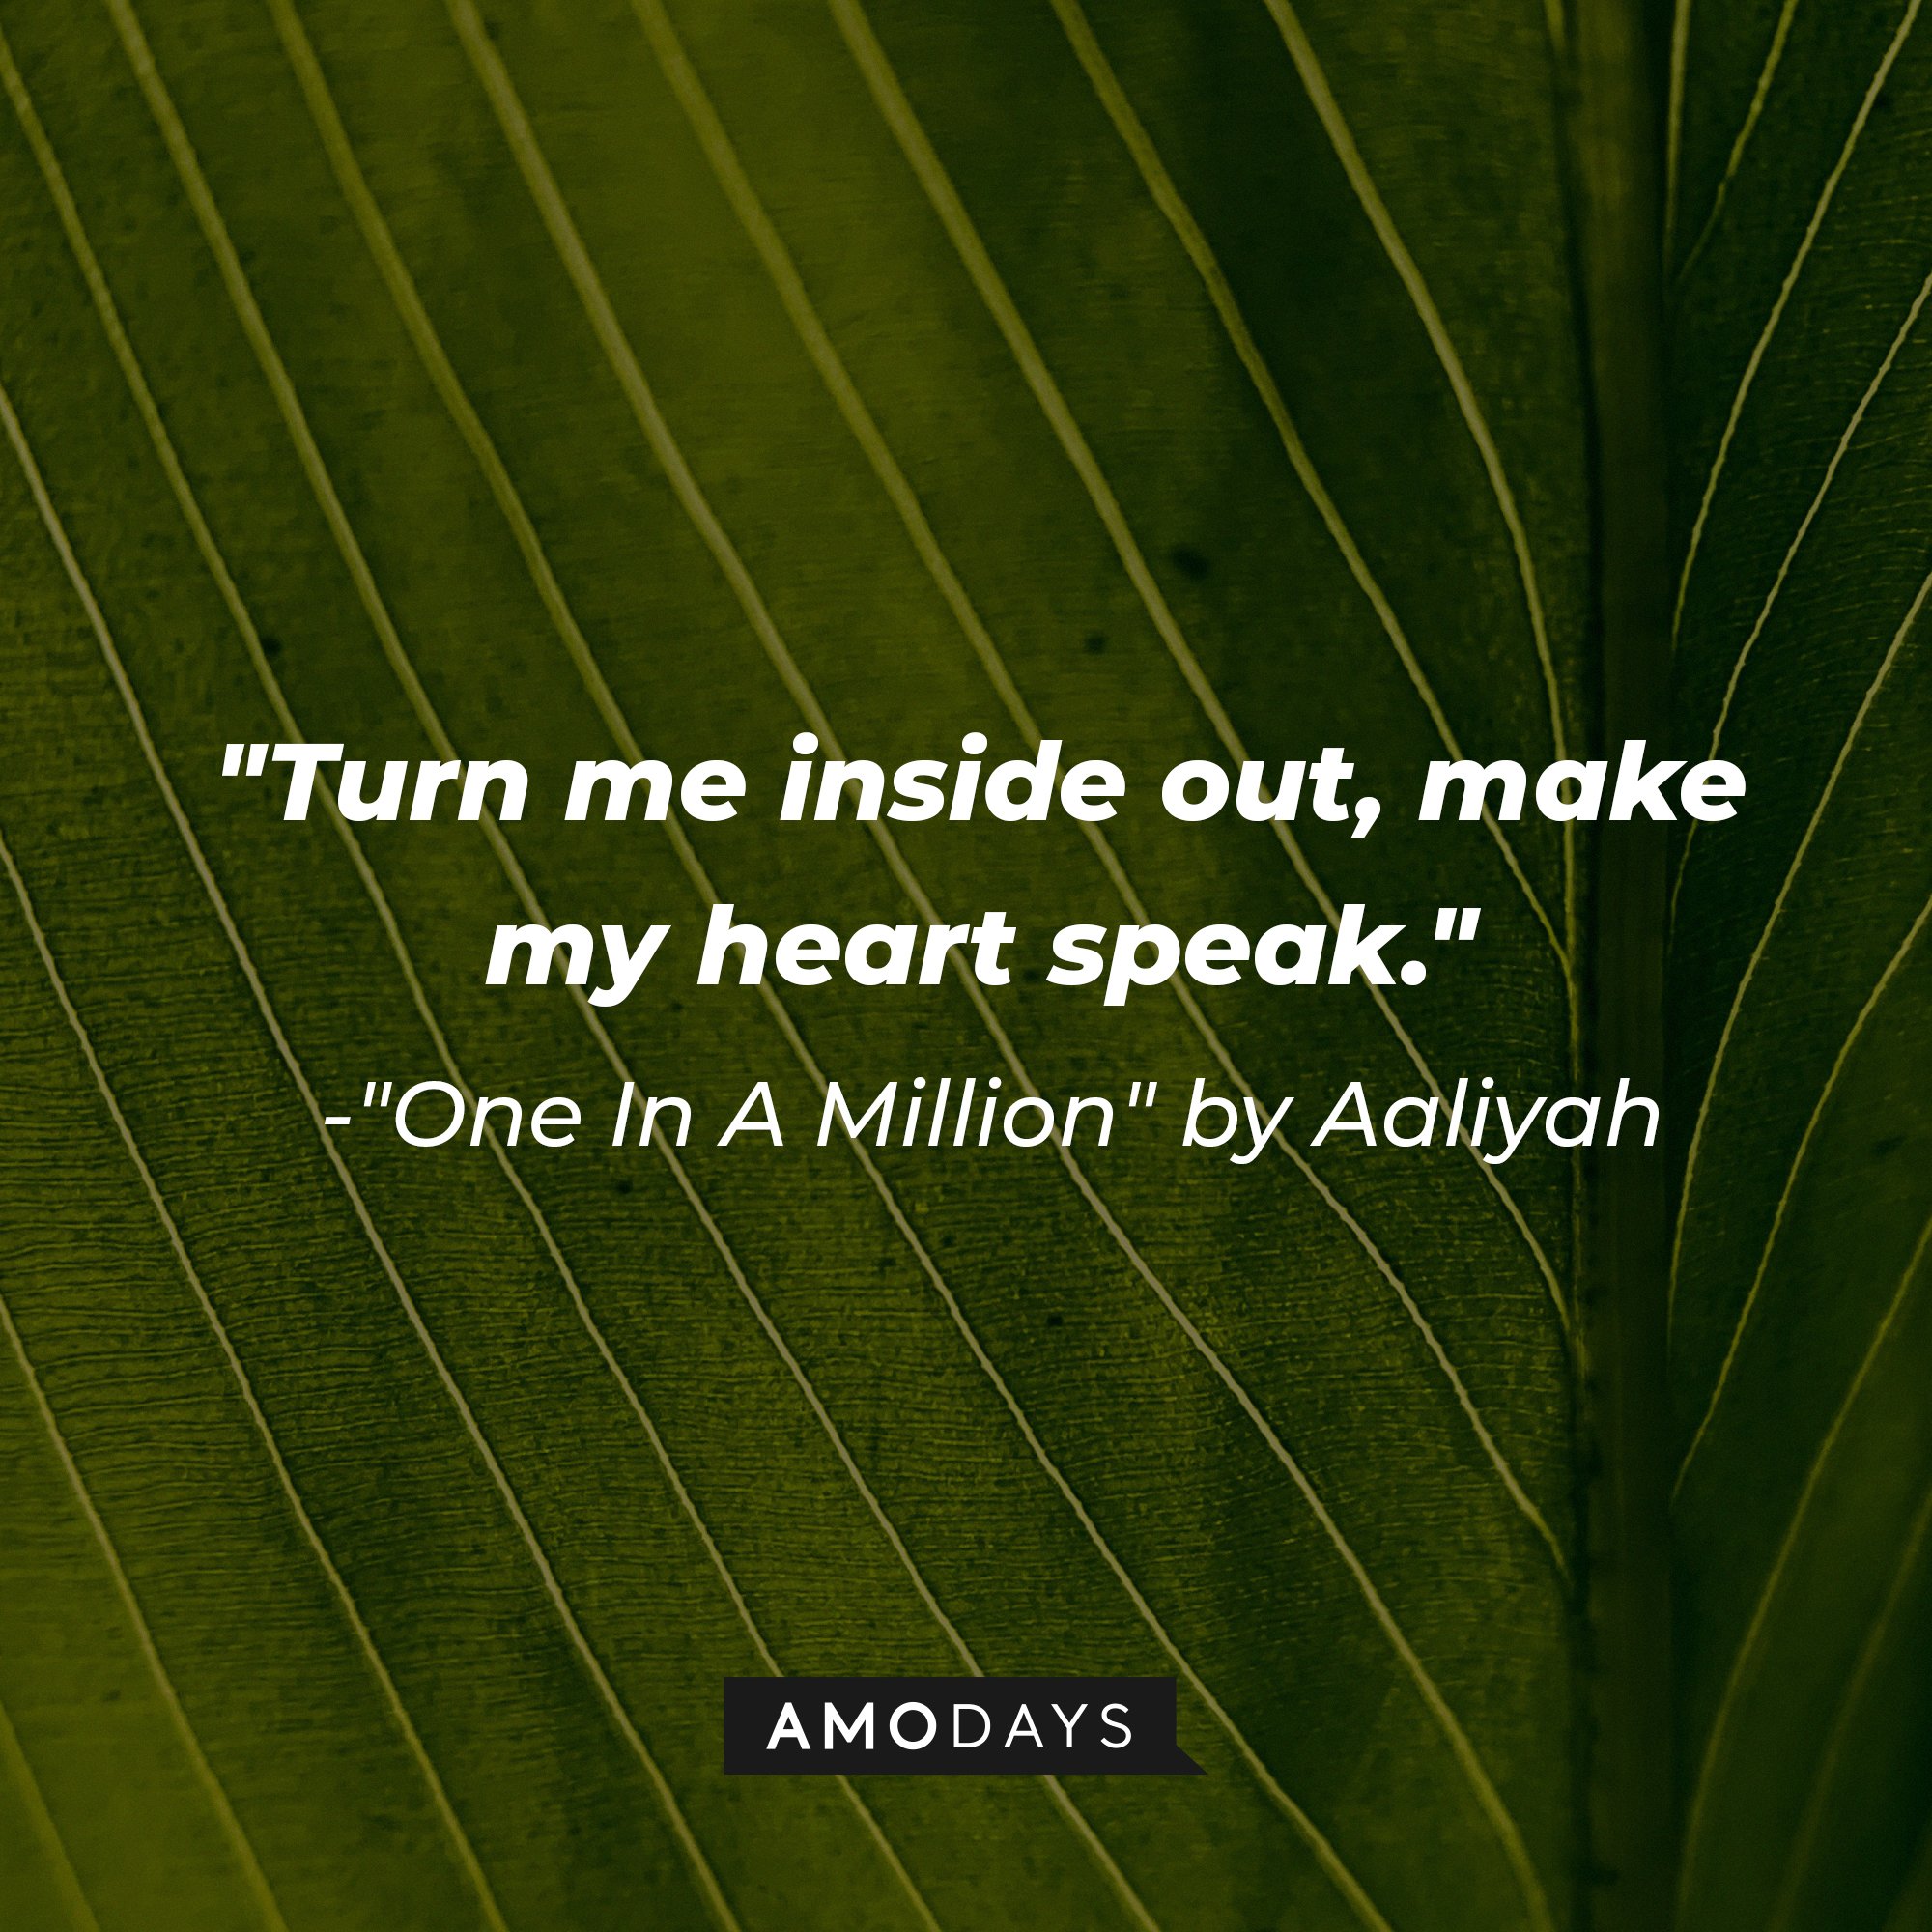 Aaliyah’s quote from "One In a Million": "Turn me inside out, make my heart speak." | Image: AmoDays